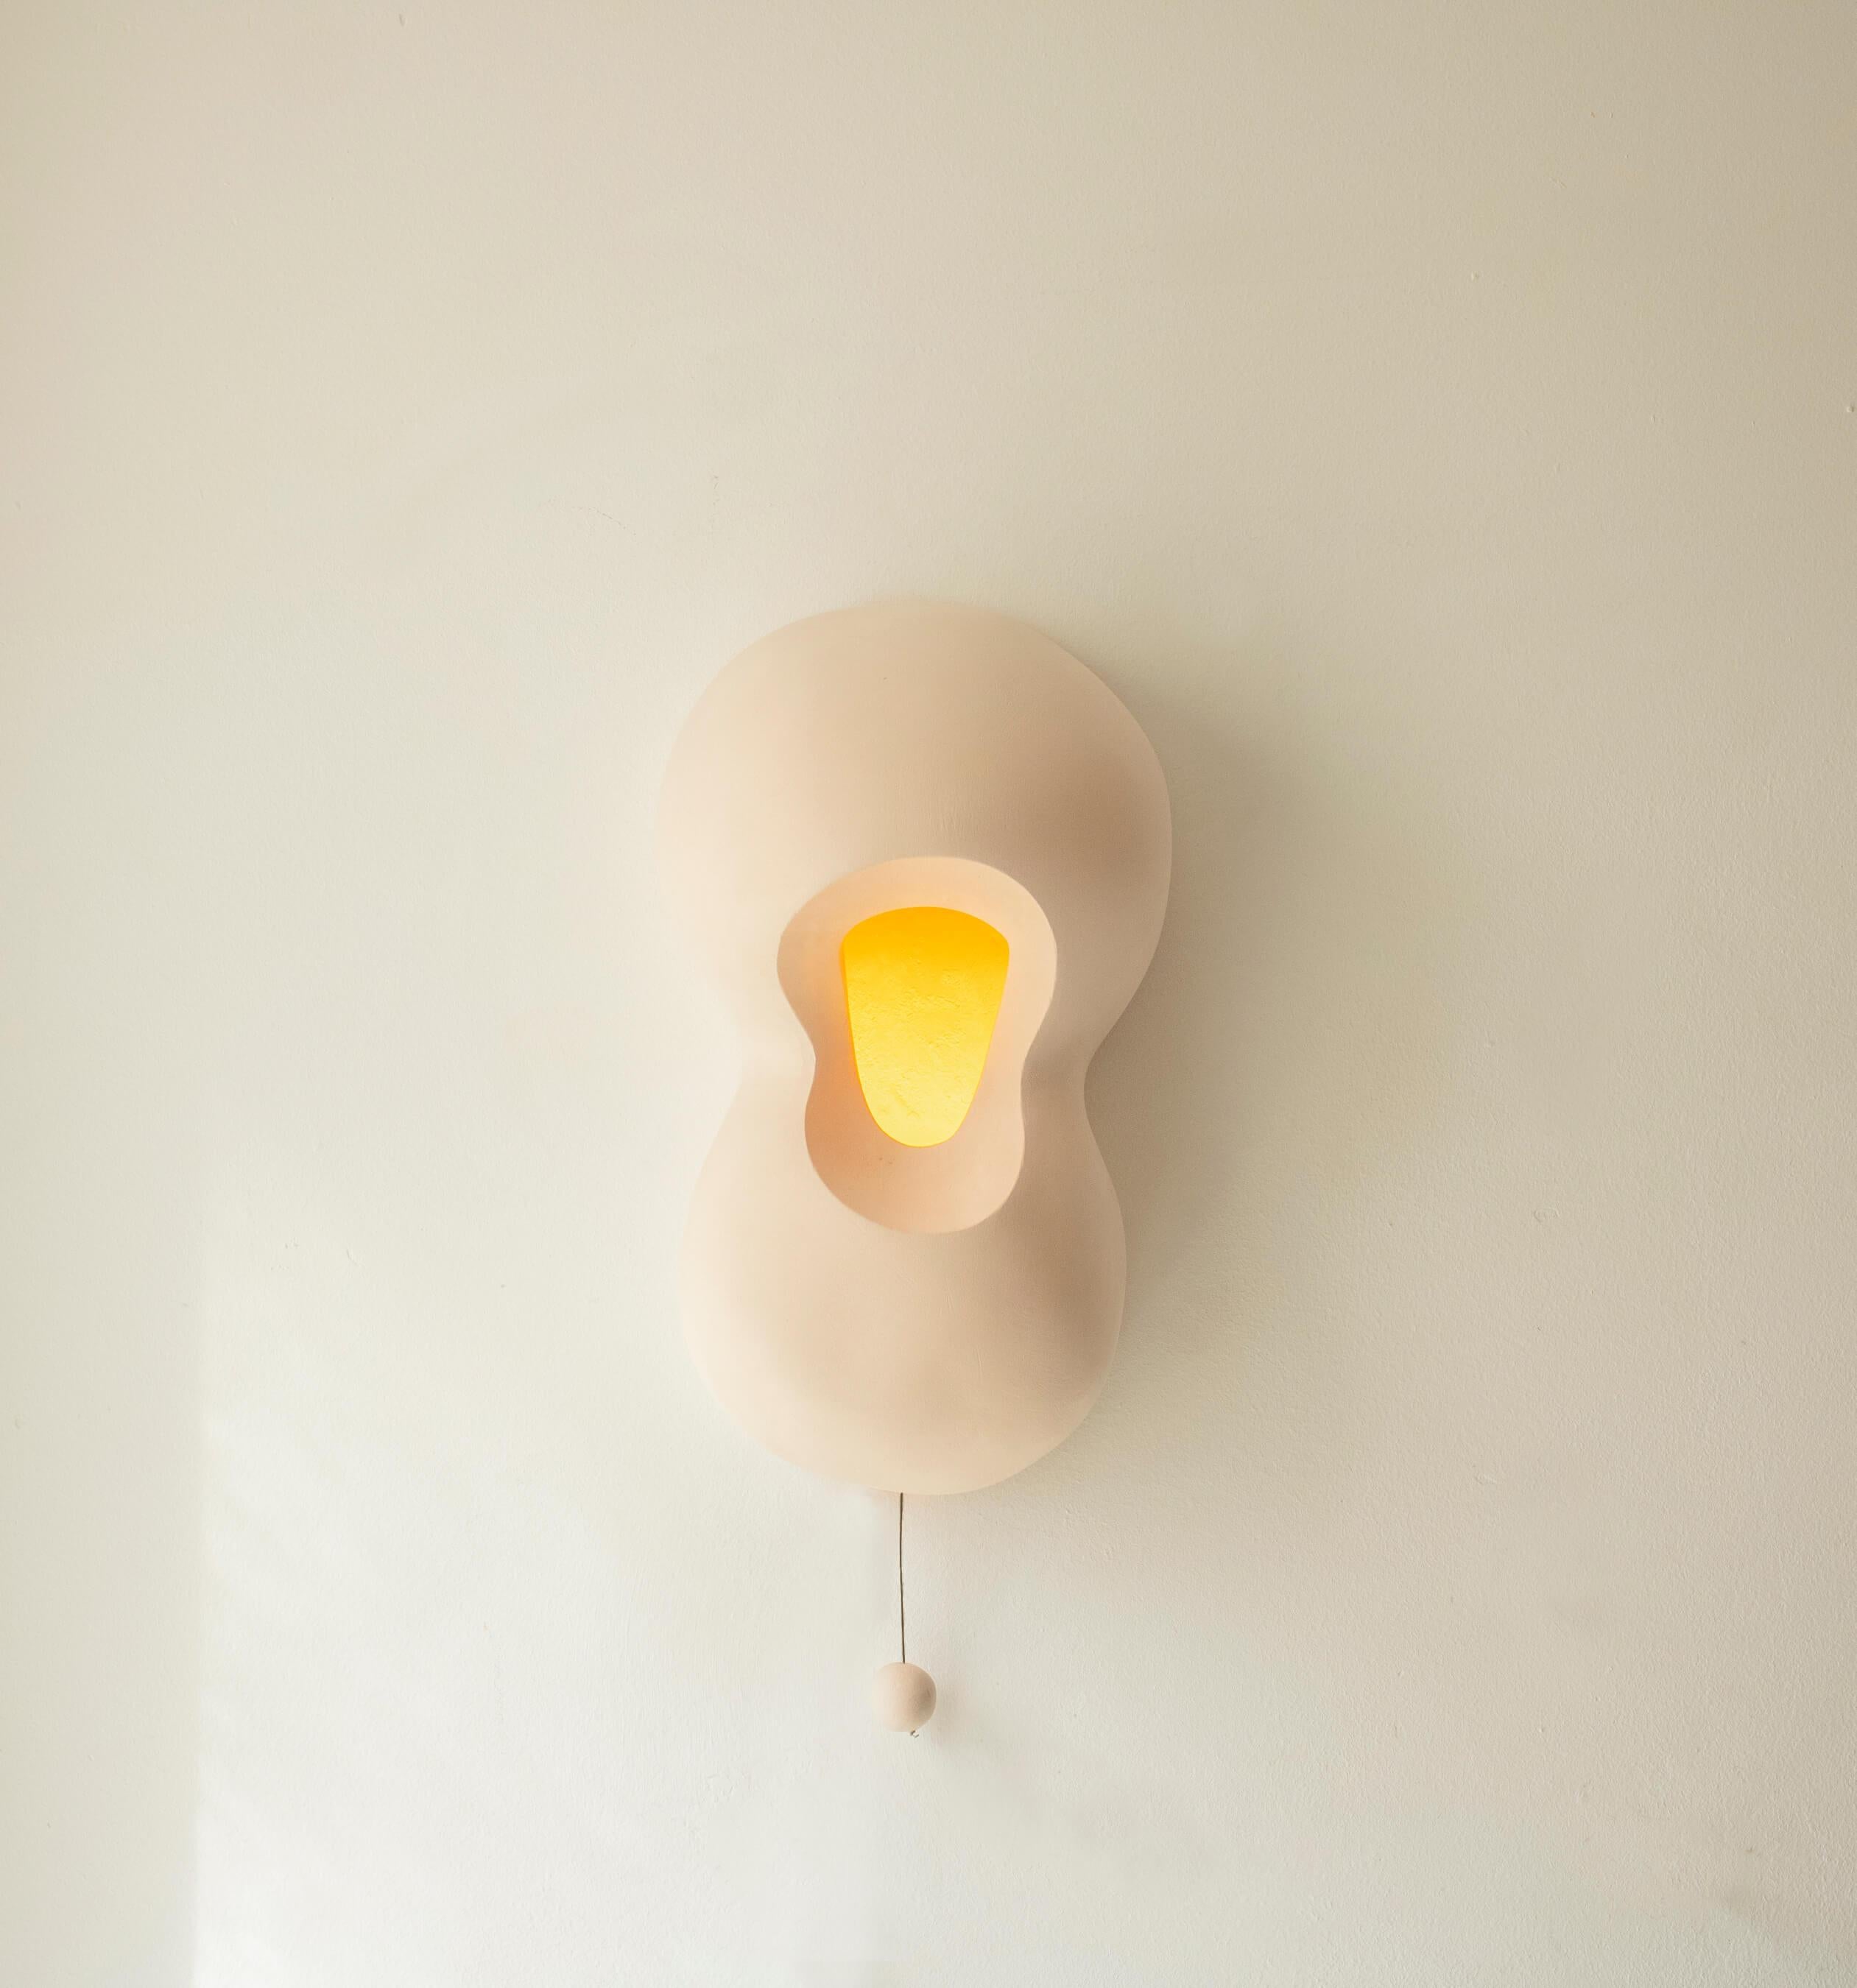 Bubble Lamp is a sculptural ceramic lamp - sconce. The Bubble Lamp stands out for its unique sculptural form and practical features. Crafted from ceramic, its organic shape and abstract contours offer an intriguing visual appeal. With its